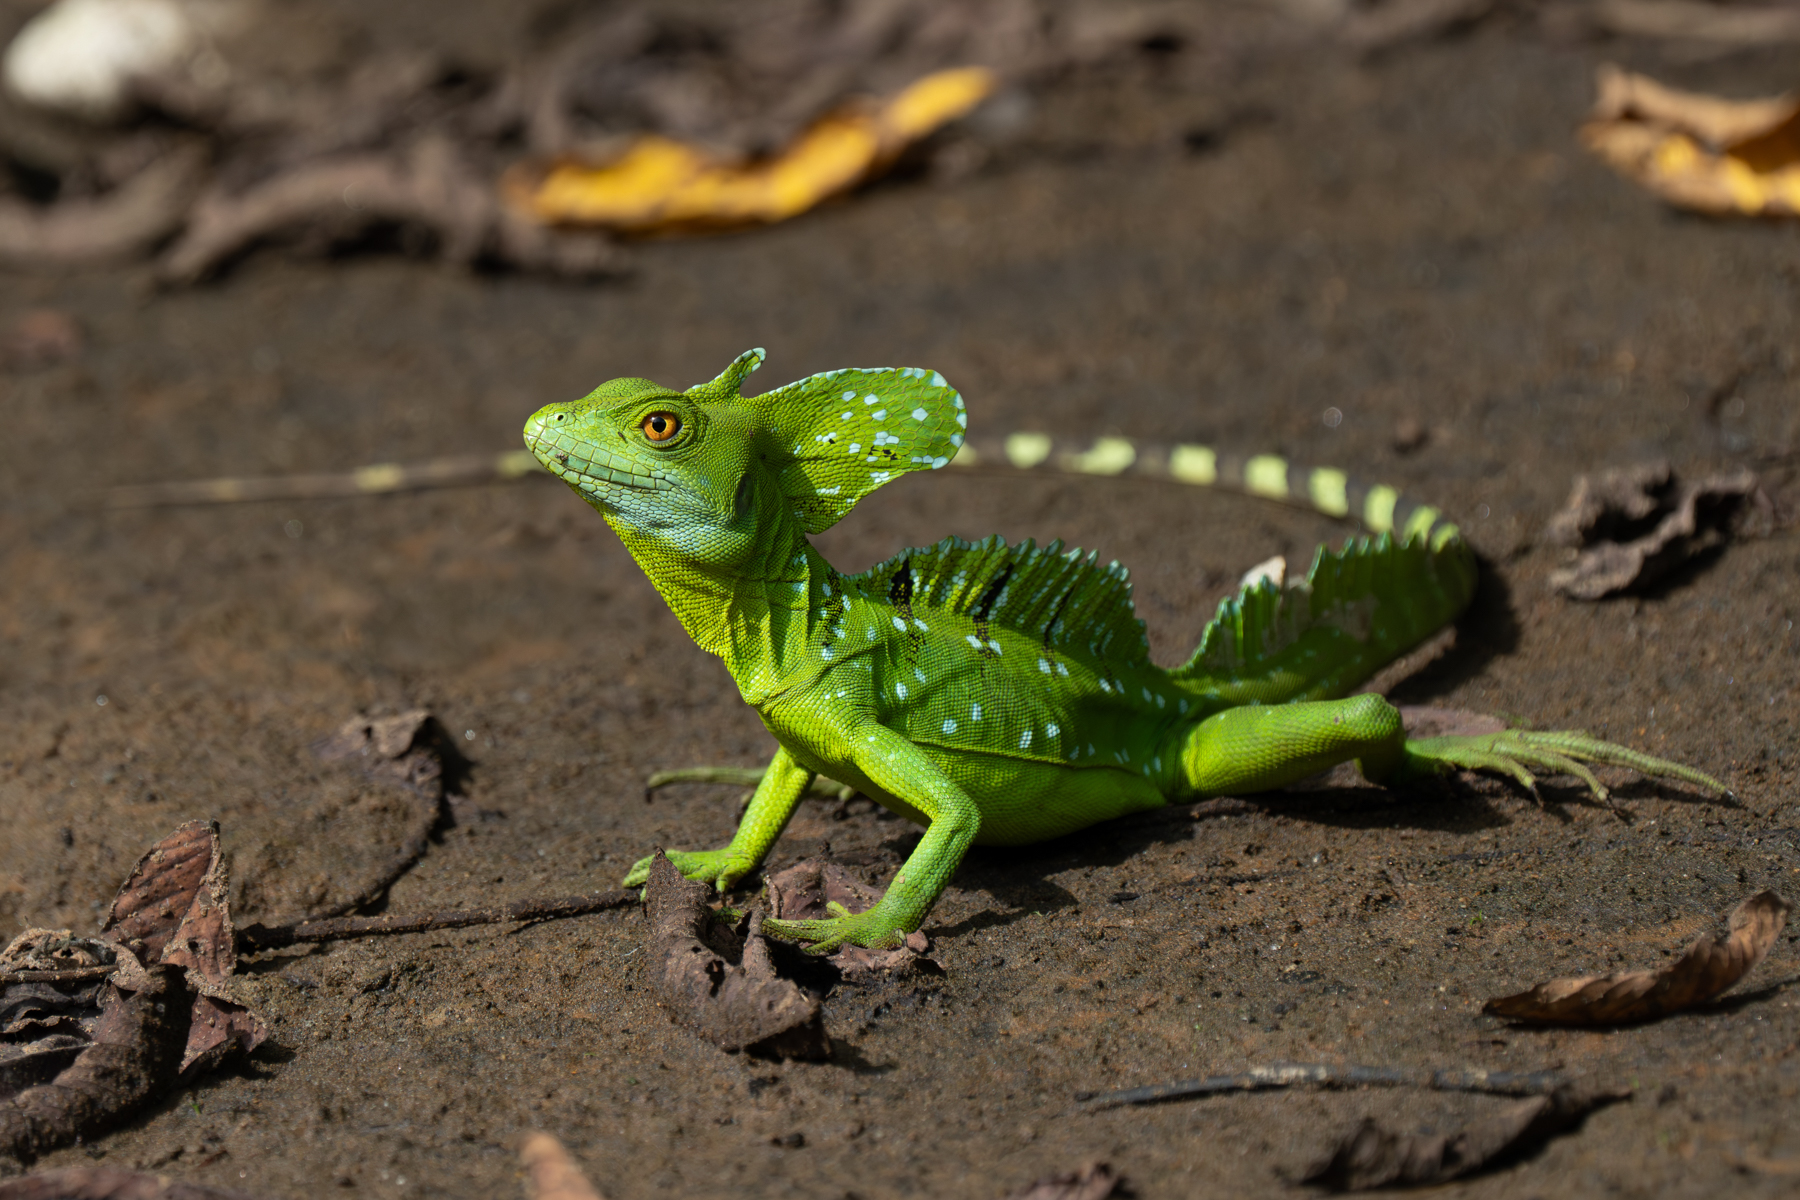 Emerald Basilisk is one of Costa Rica's most charismatic lizards (image by Inger Vandyke)